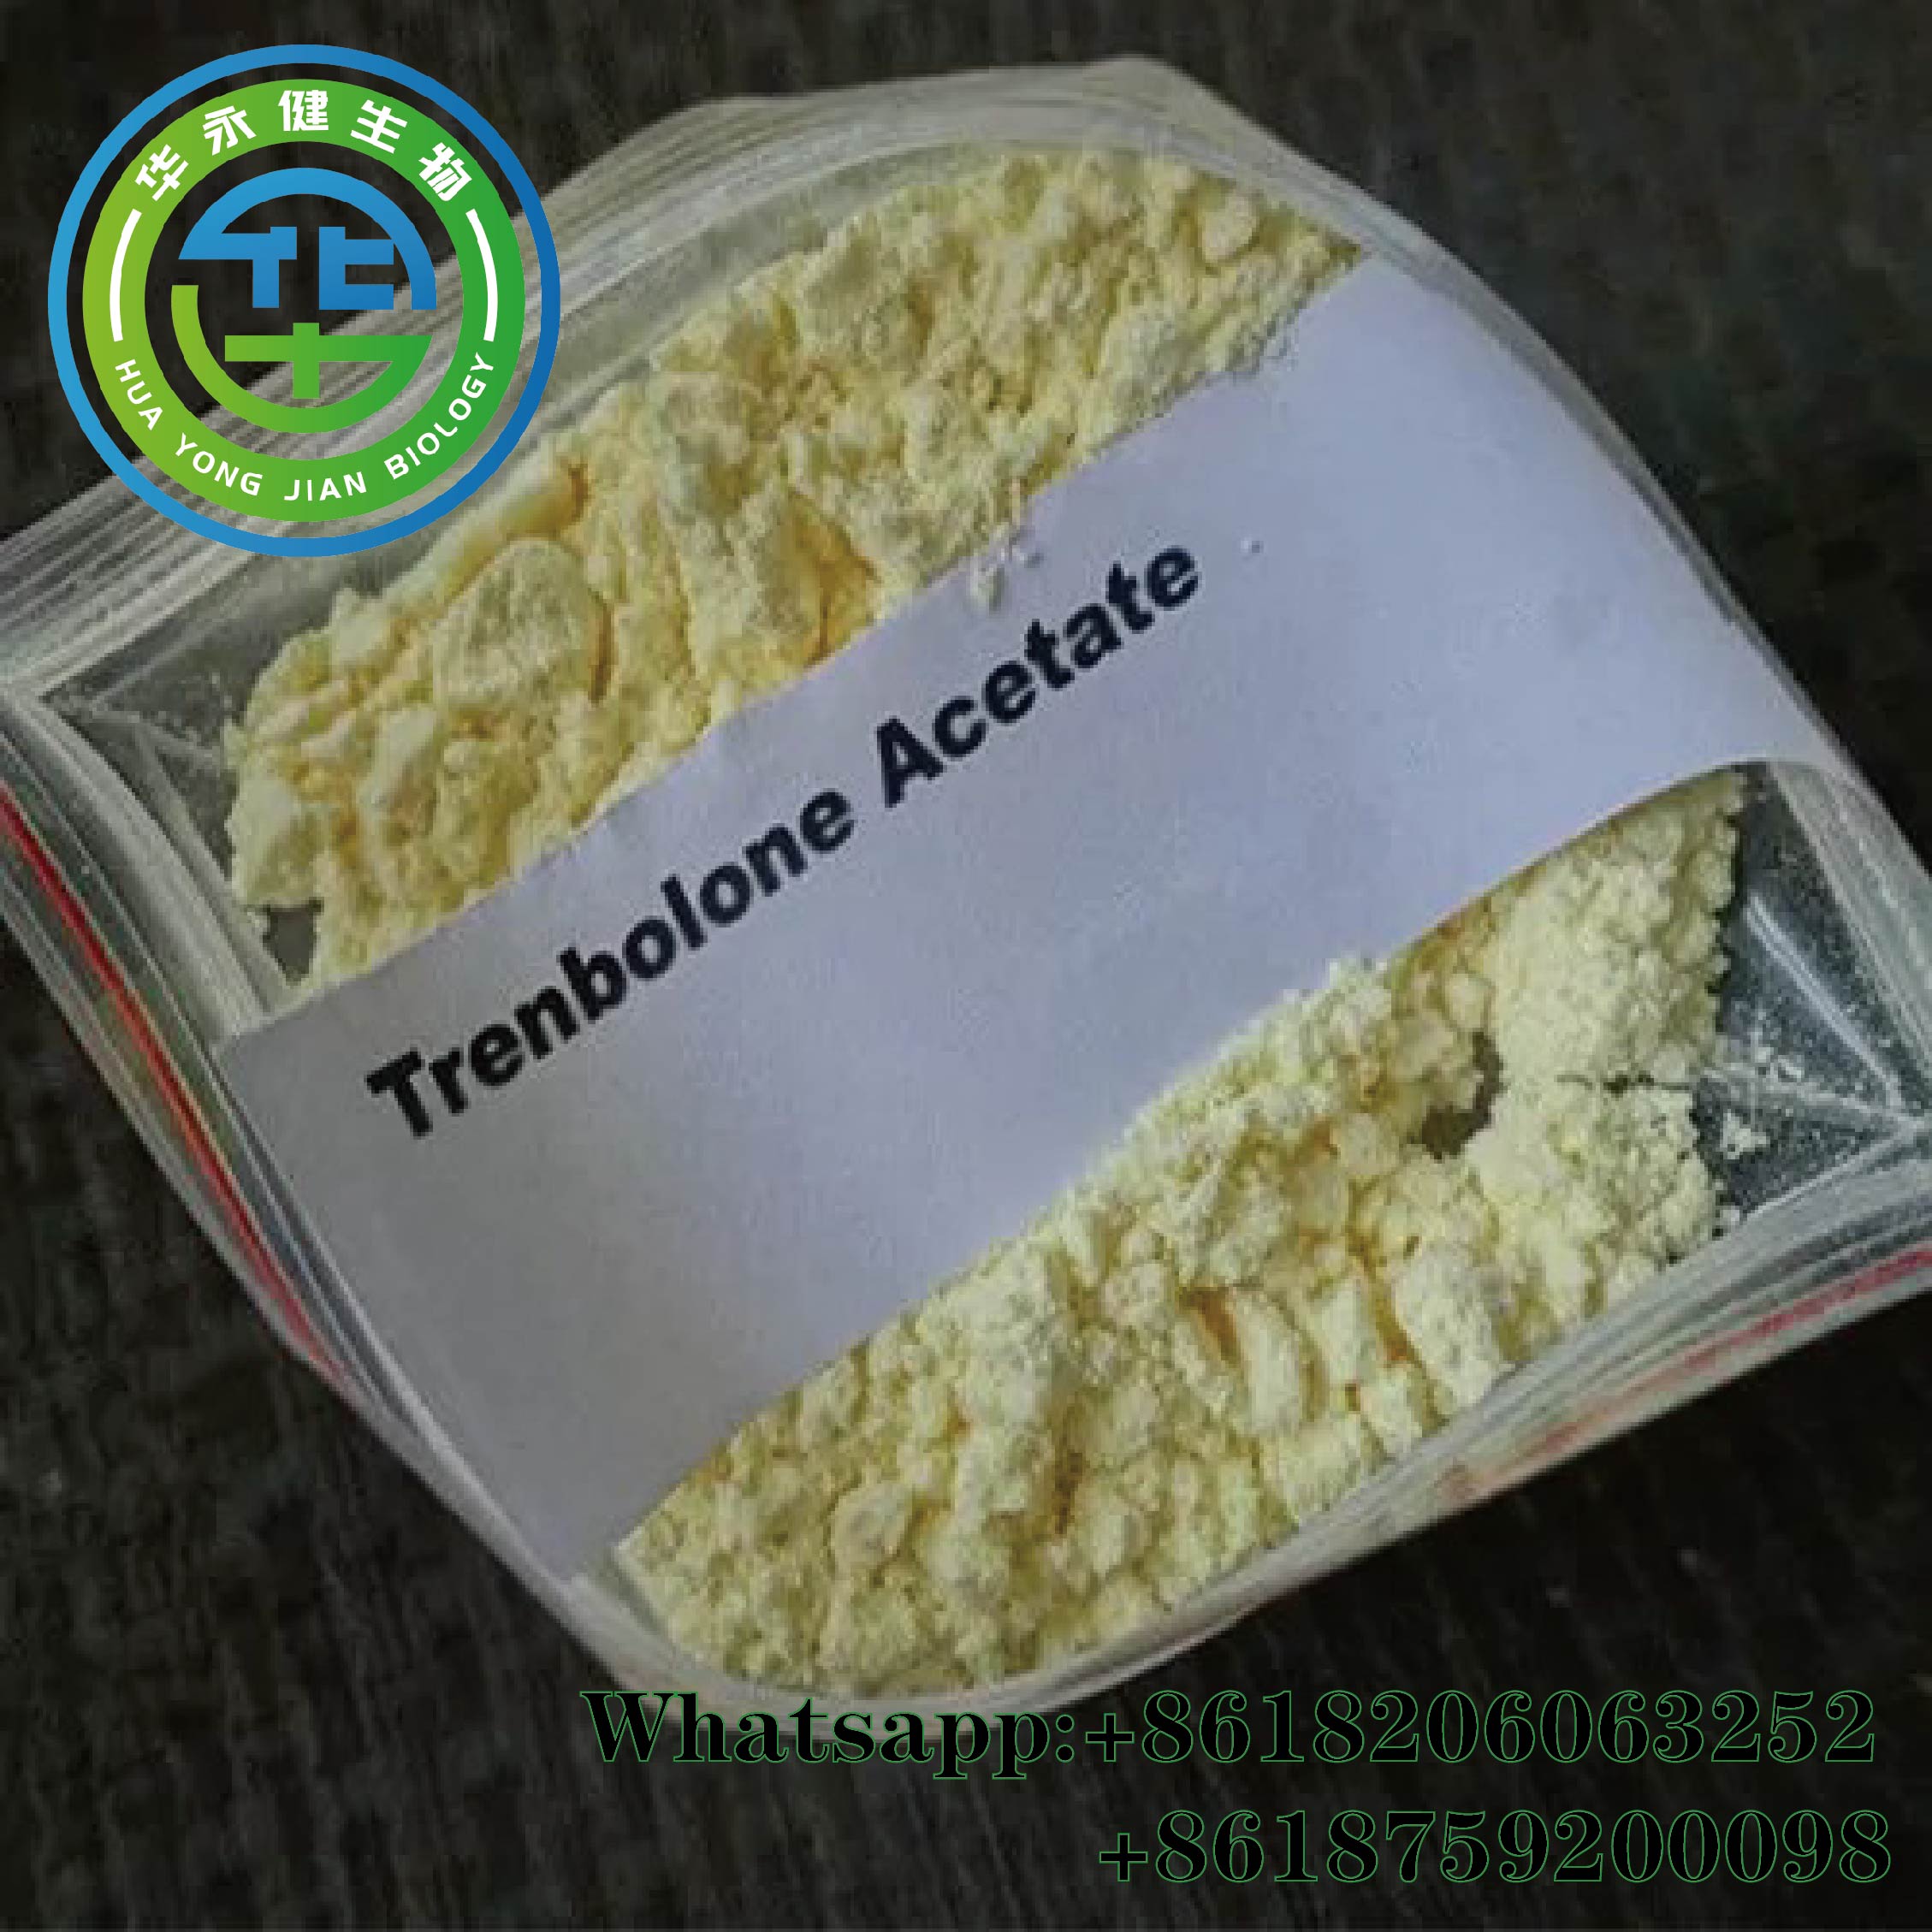 Trenb Acetate Trenb Enanthe Raw Steroid Powder Safe Delivery